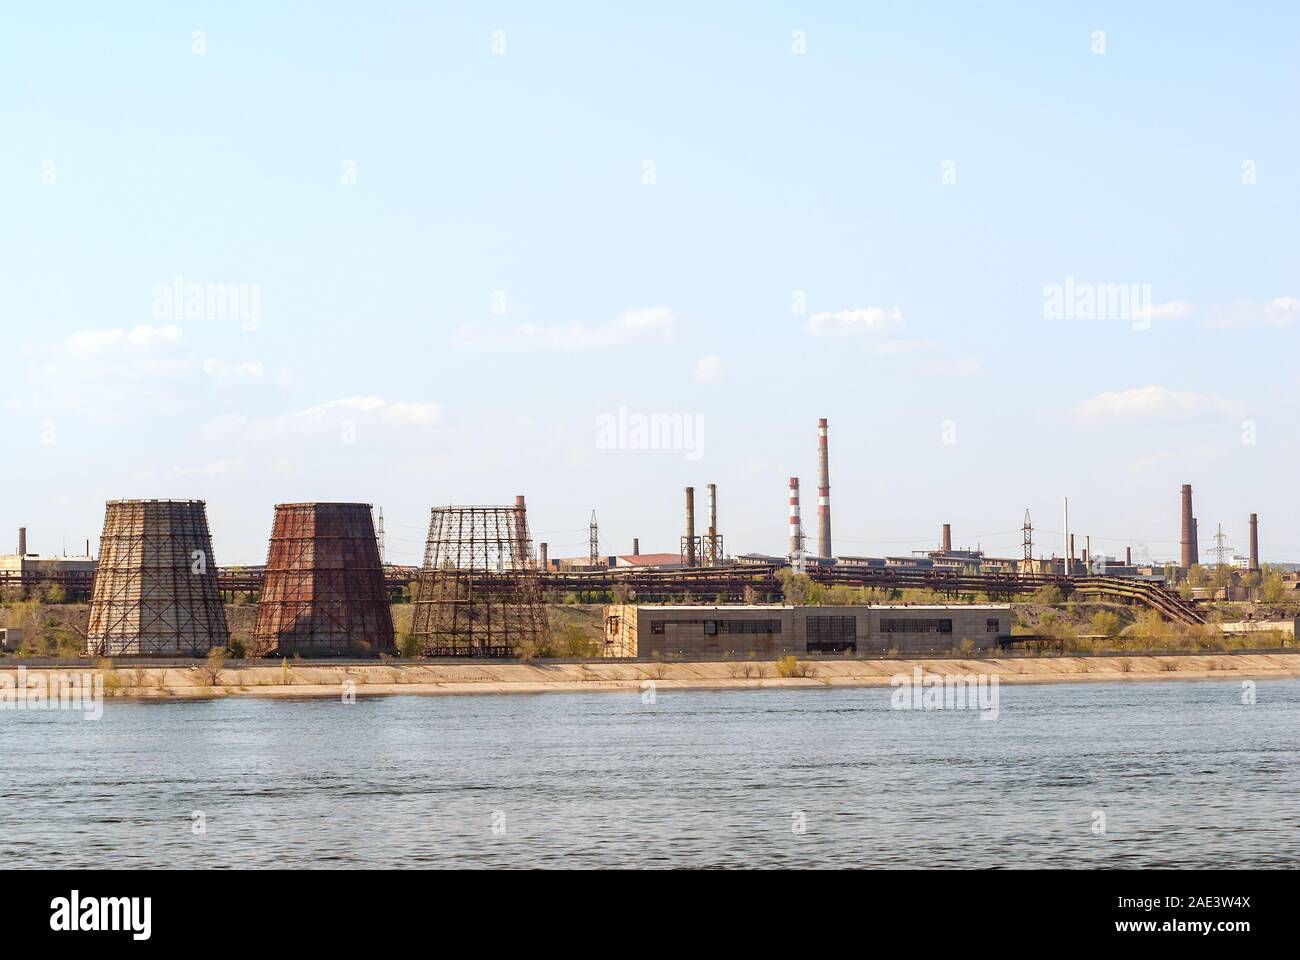 Ironworks located on the river coastline. Industrial landscape. Stock Photo